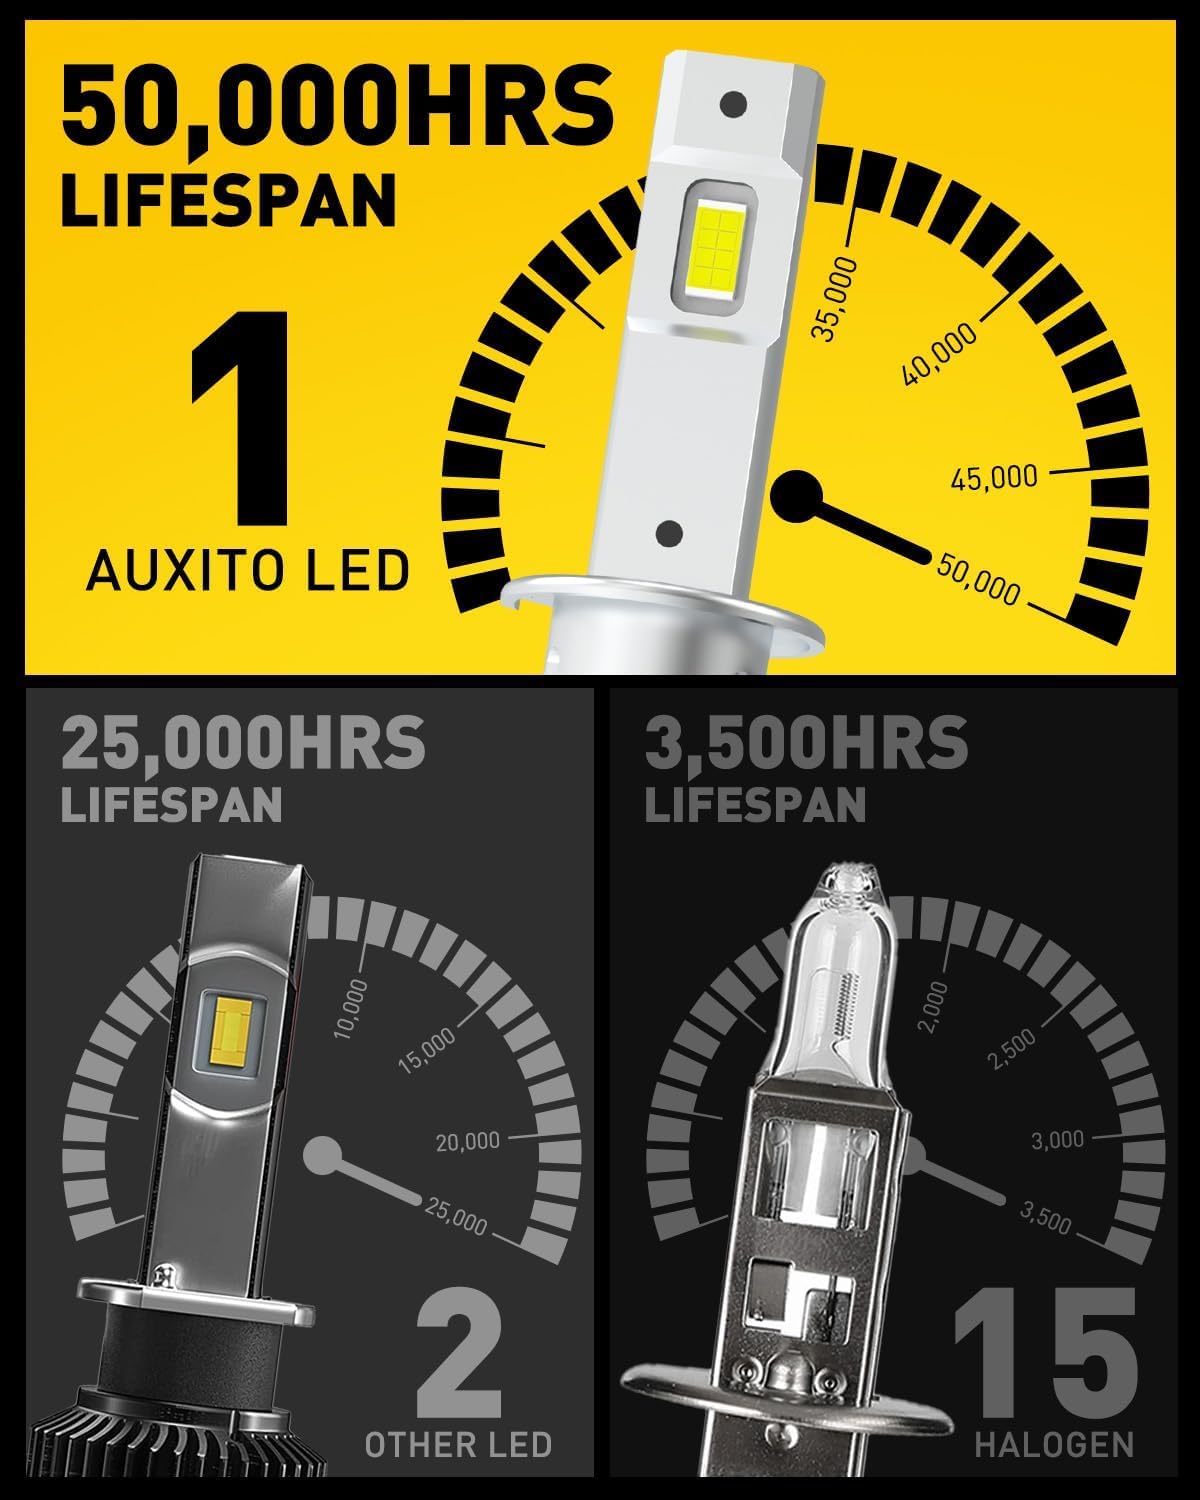 AUXITO H7 LED Light Bulbs 6500K White, 8 CSP Chips Super Bright H7, No Adapter Required, 1:1 Mini Size, Non-polarity, Easy Install, Fanless H7ll Fog lights, Pack of 2